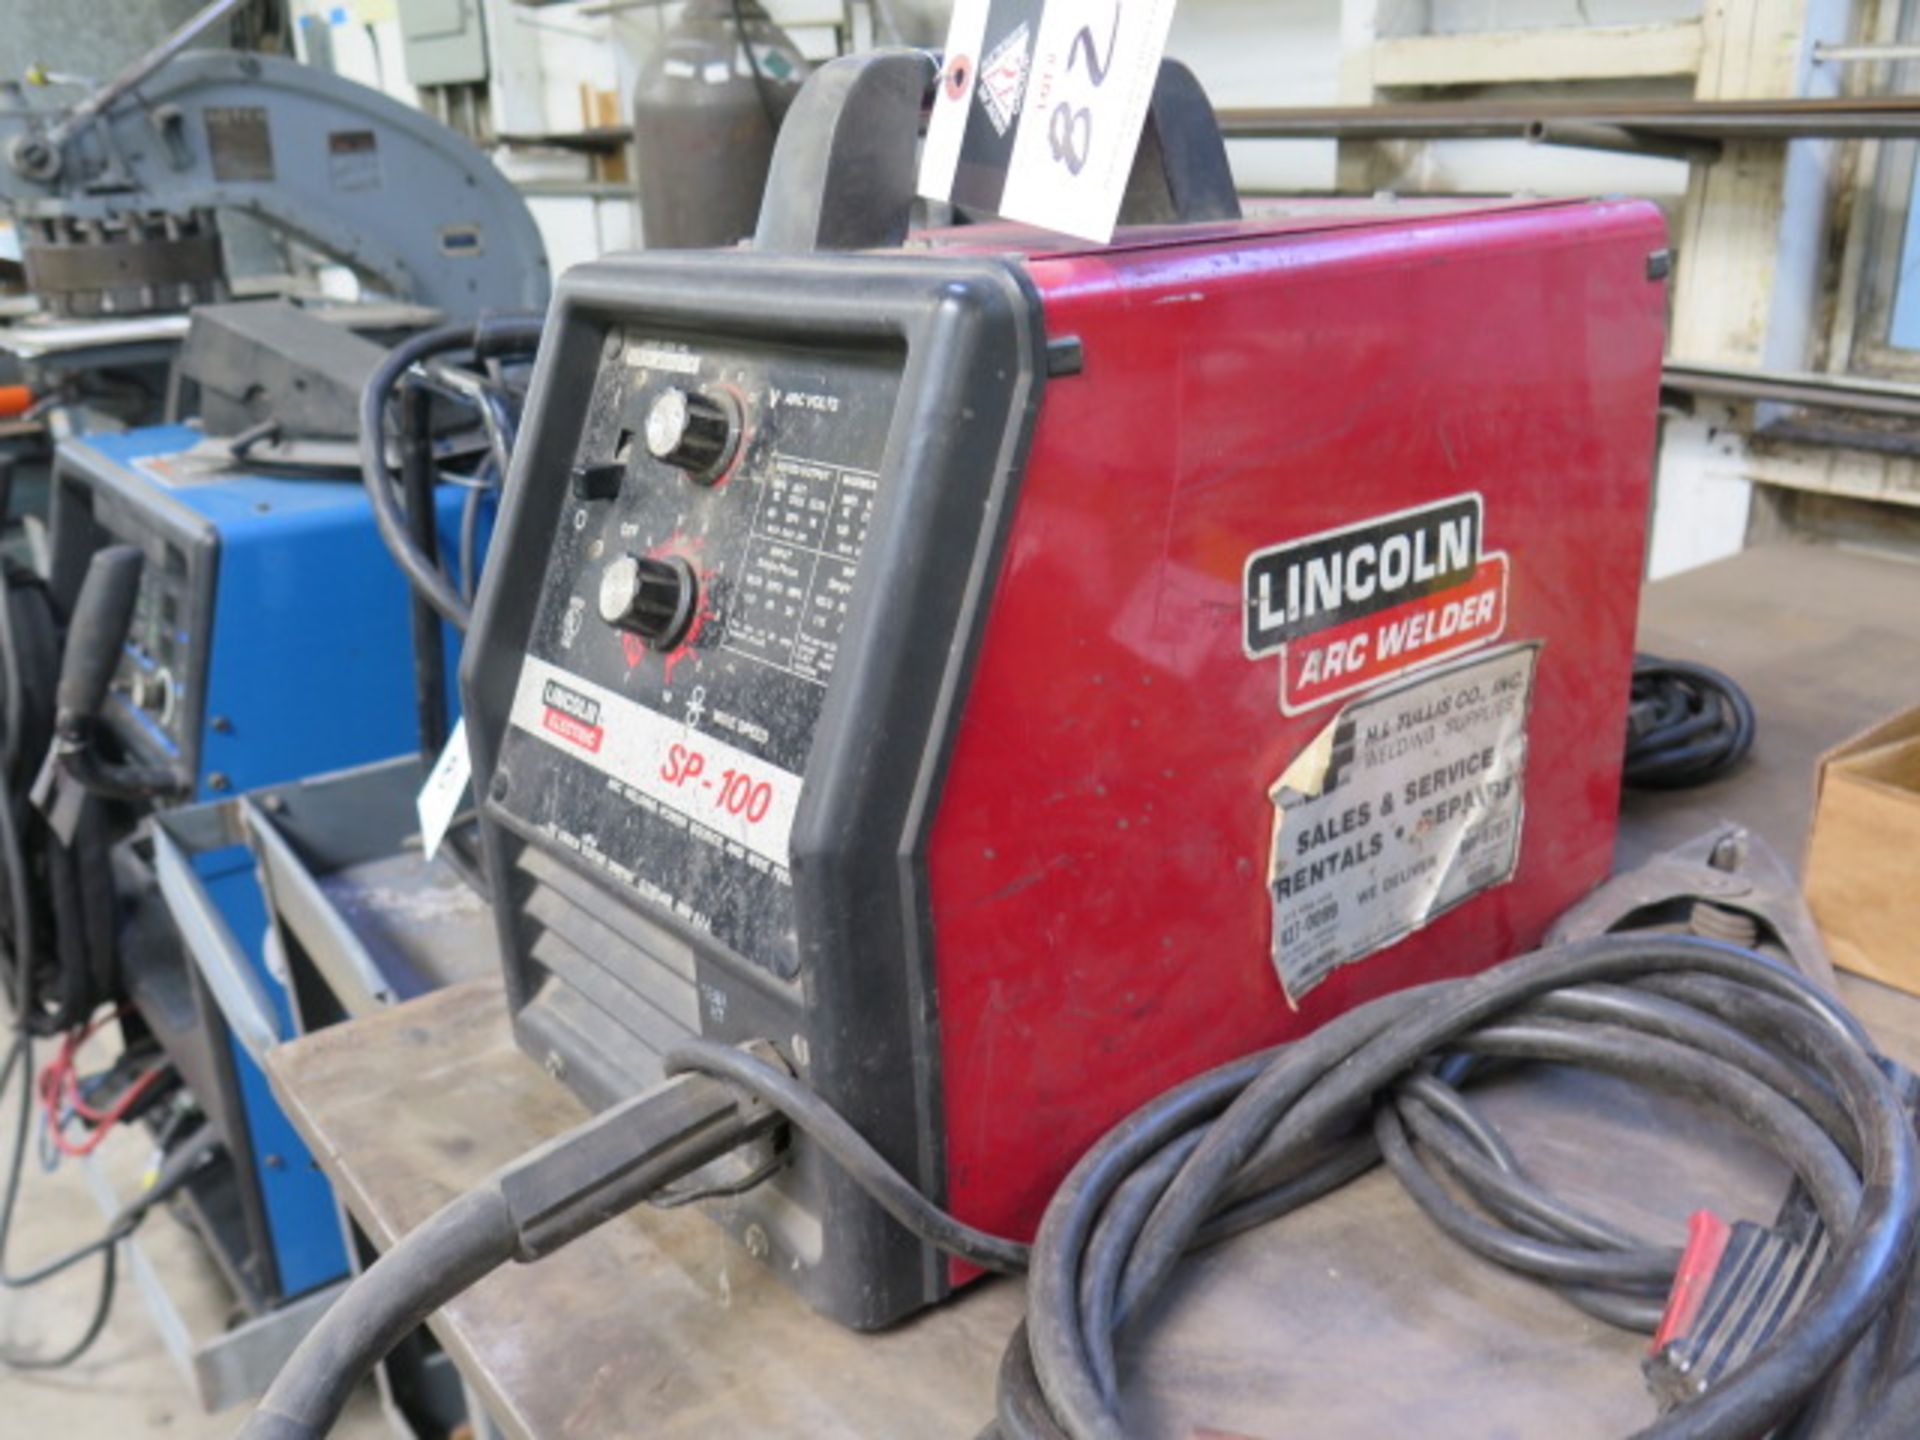 Lincoln SP-100 110 Volt Arc Welding Power Source and Wire Feeder (SOLD AS-IS - NO WARRANTY) - Image 2 of 6